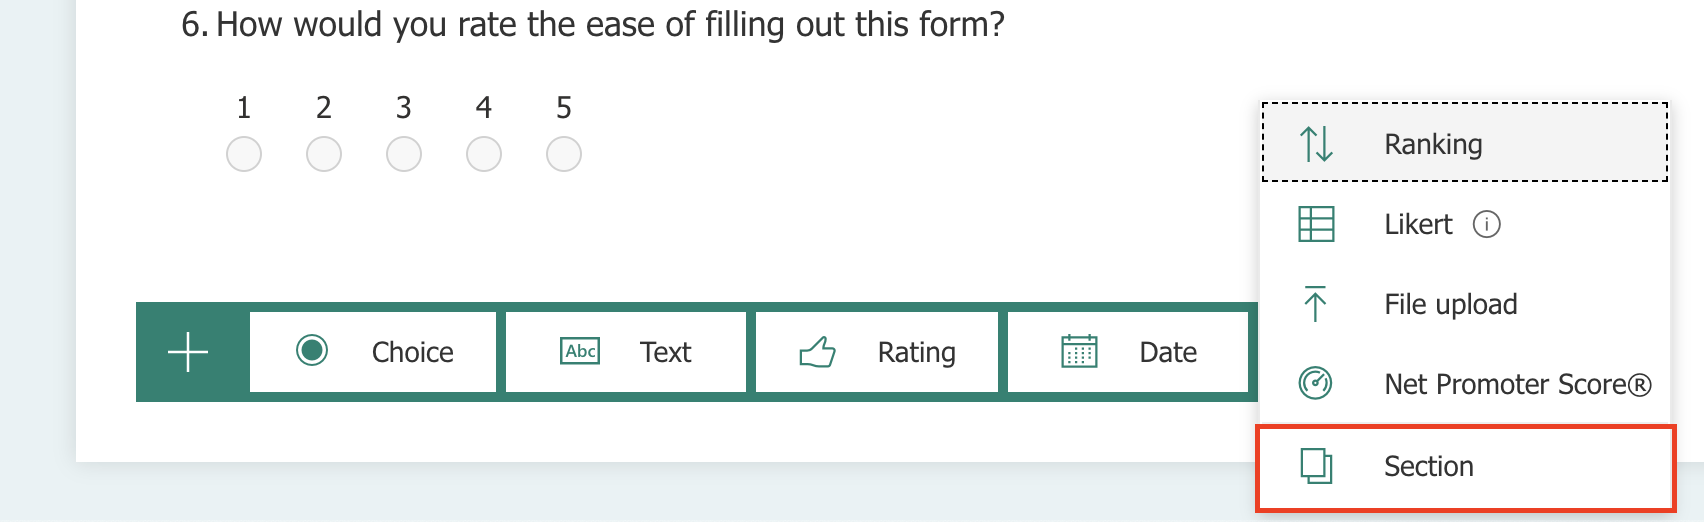 Screenshot showing the types of questions that can be added to a Microsoft Form, with the Section option emphasized with a red border